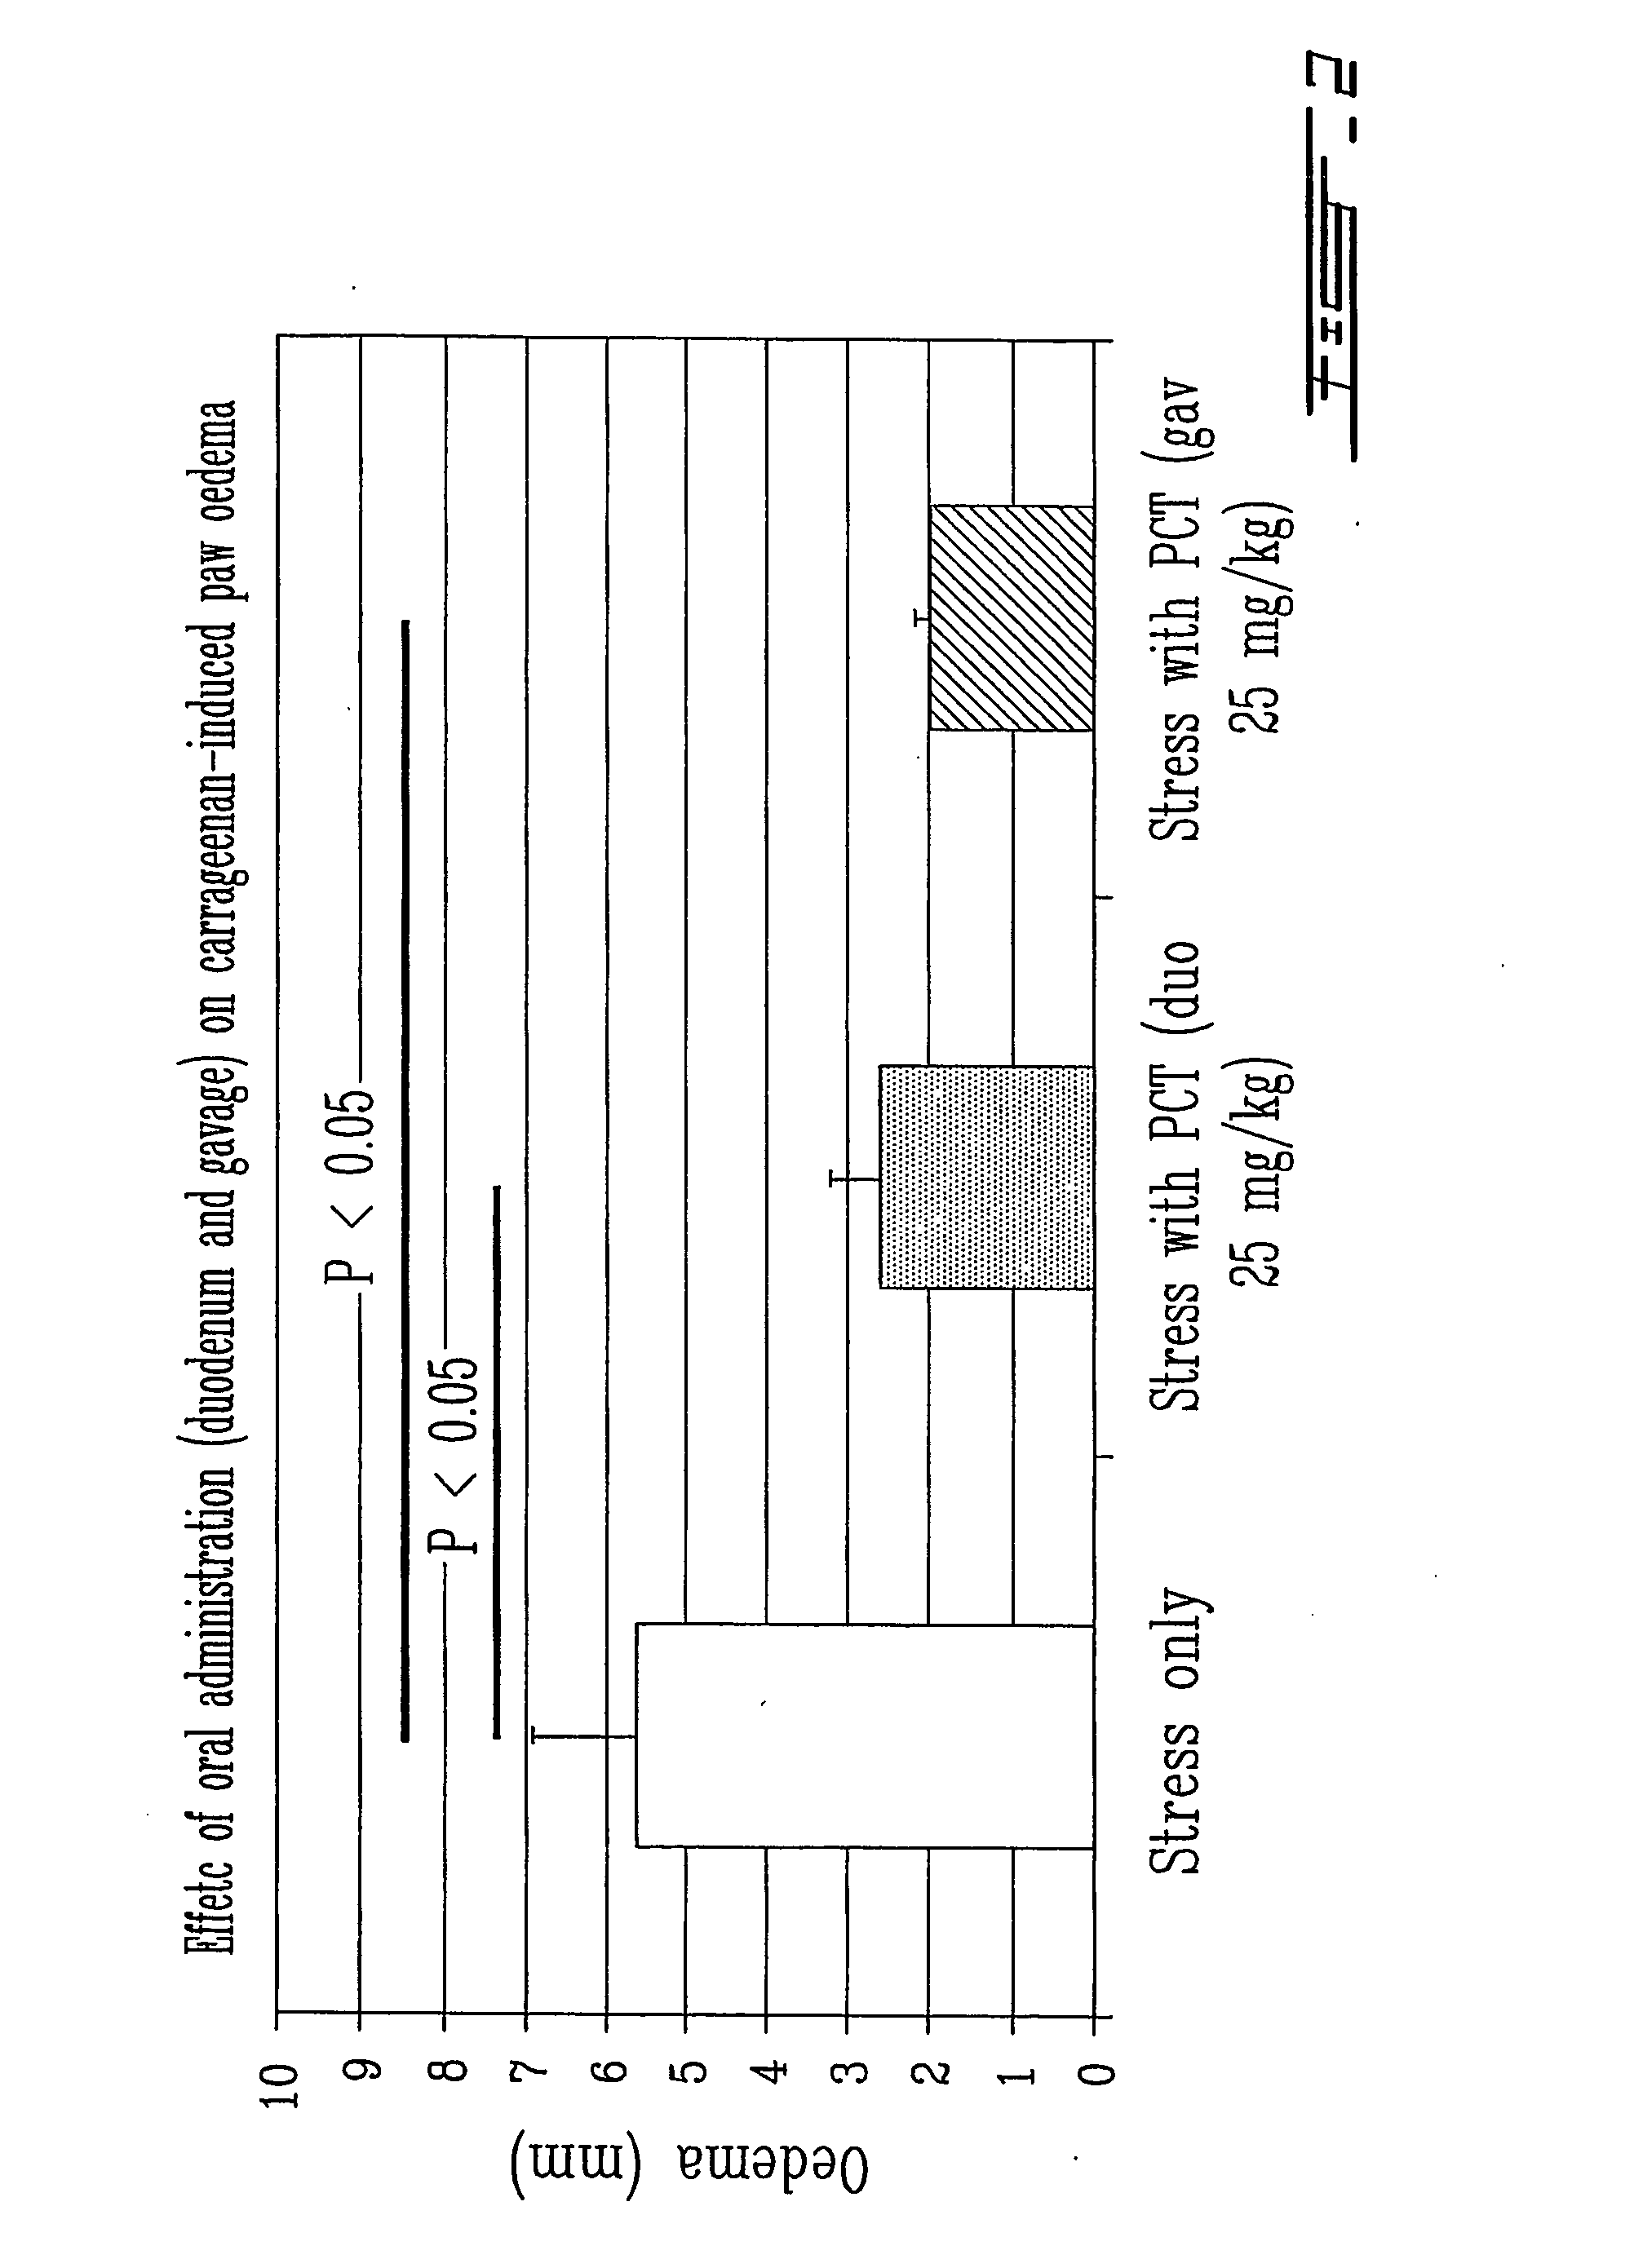 Oral compositions and route of administration for the delivery of a thylakoid extract